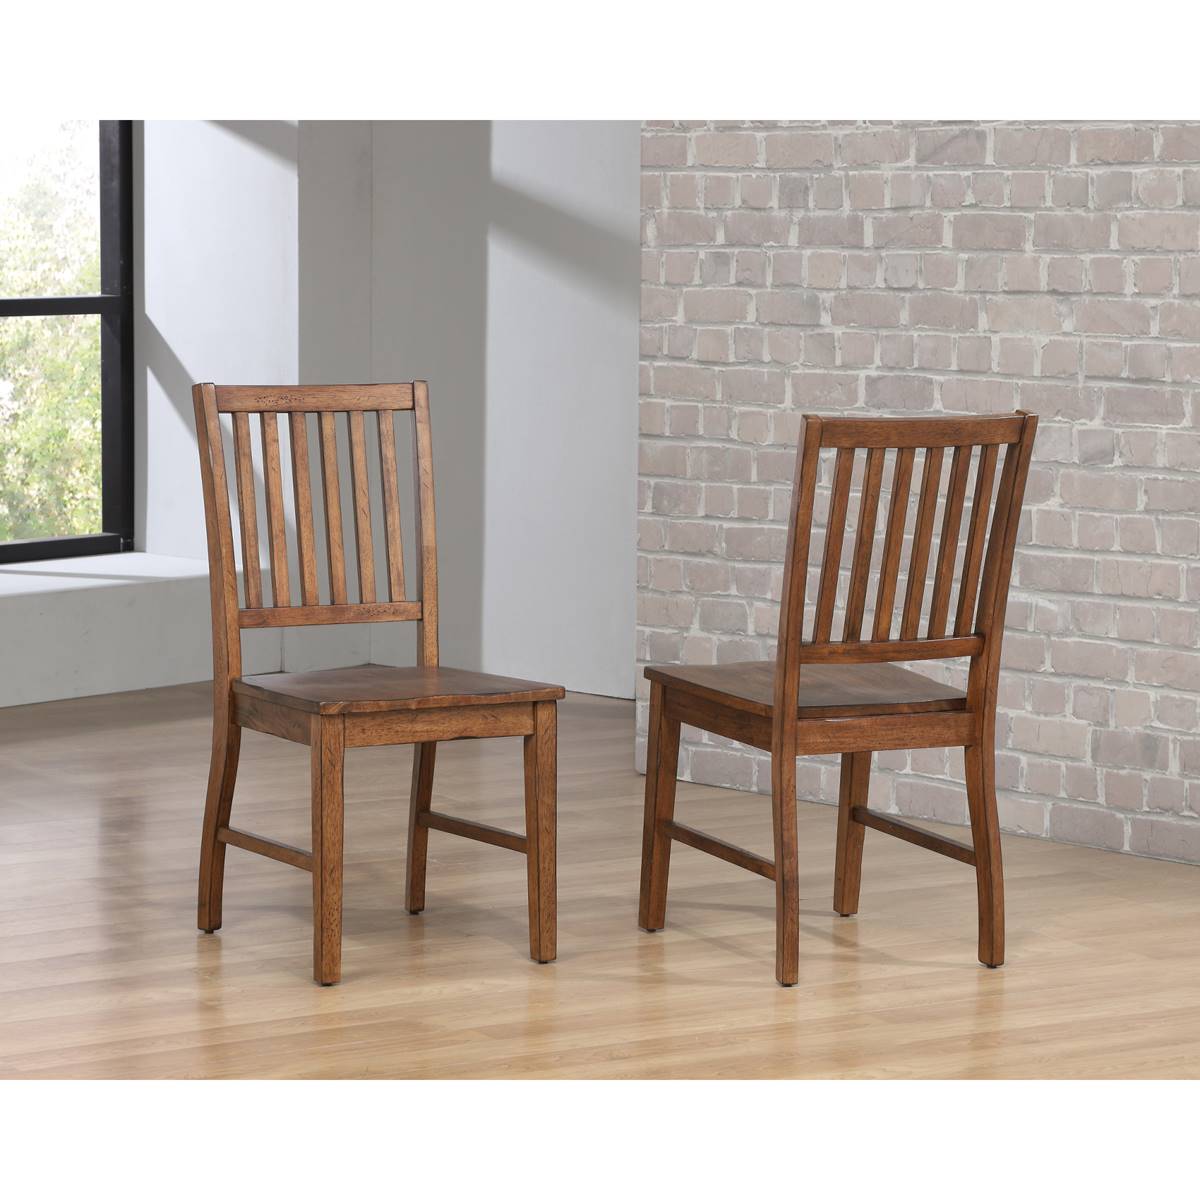 Besthom Simply Brook Side Chairs - Set Of 2